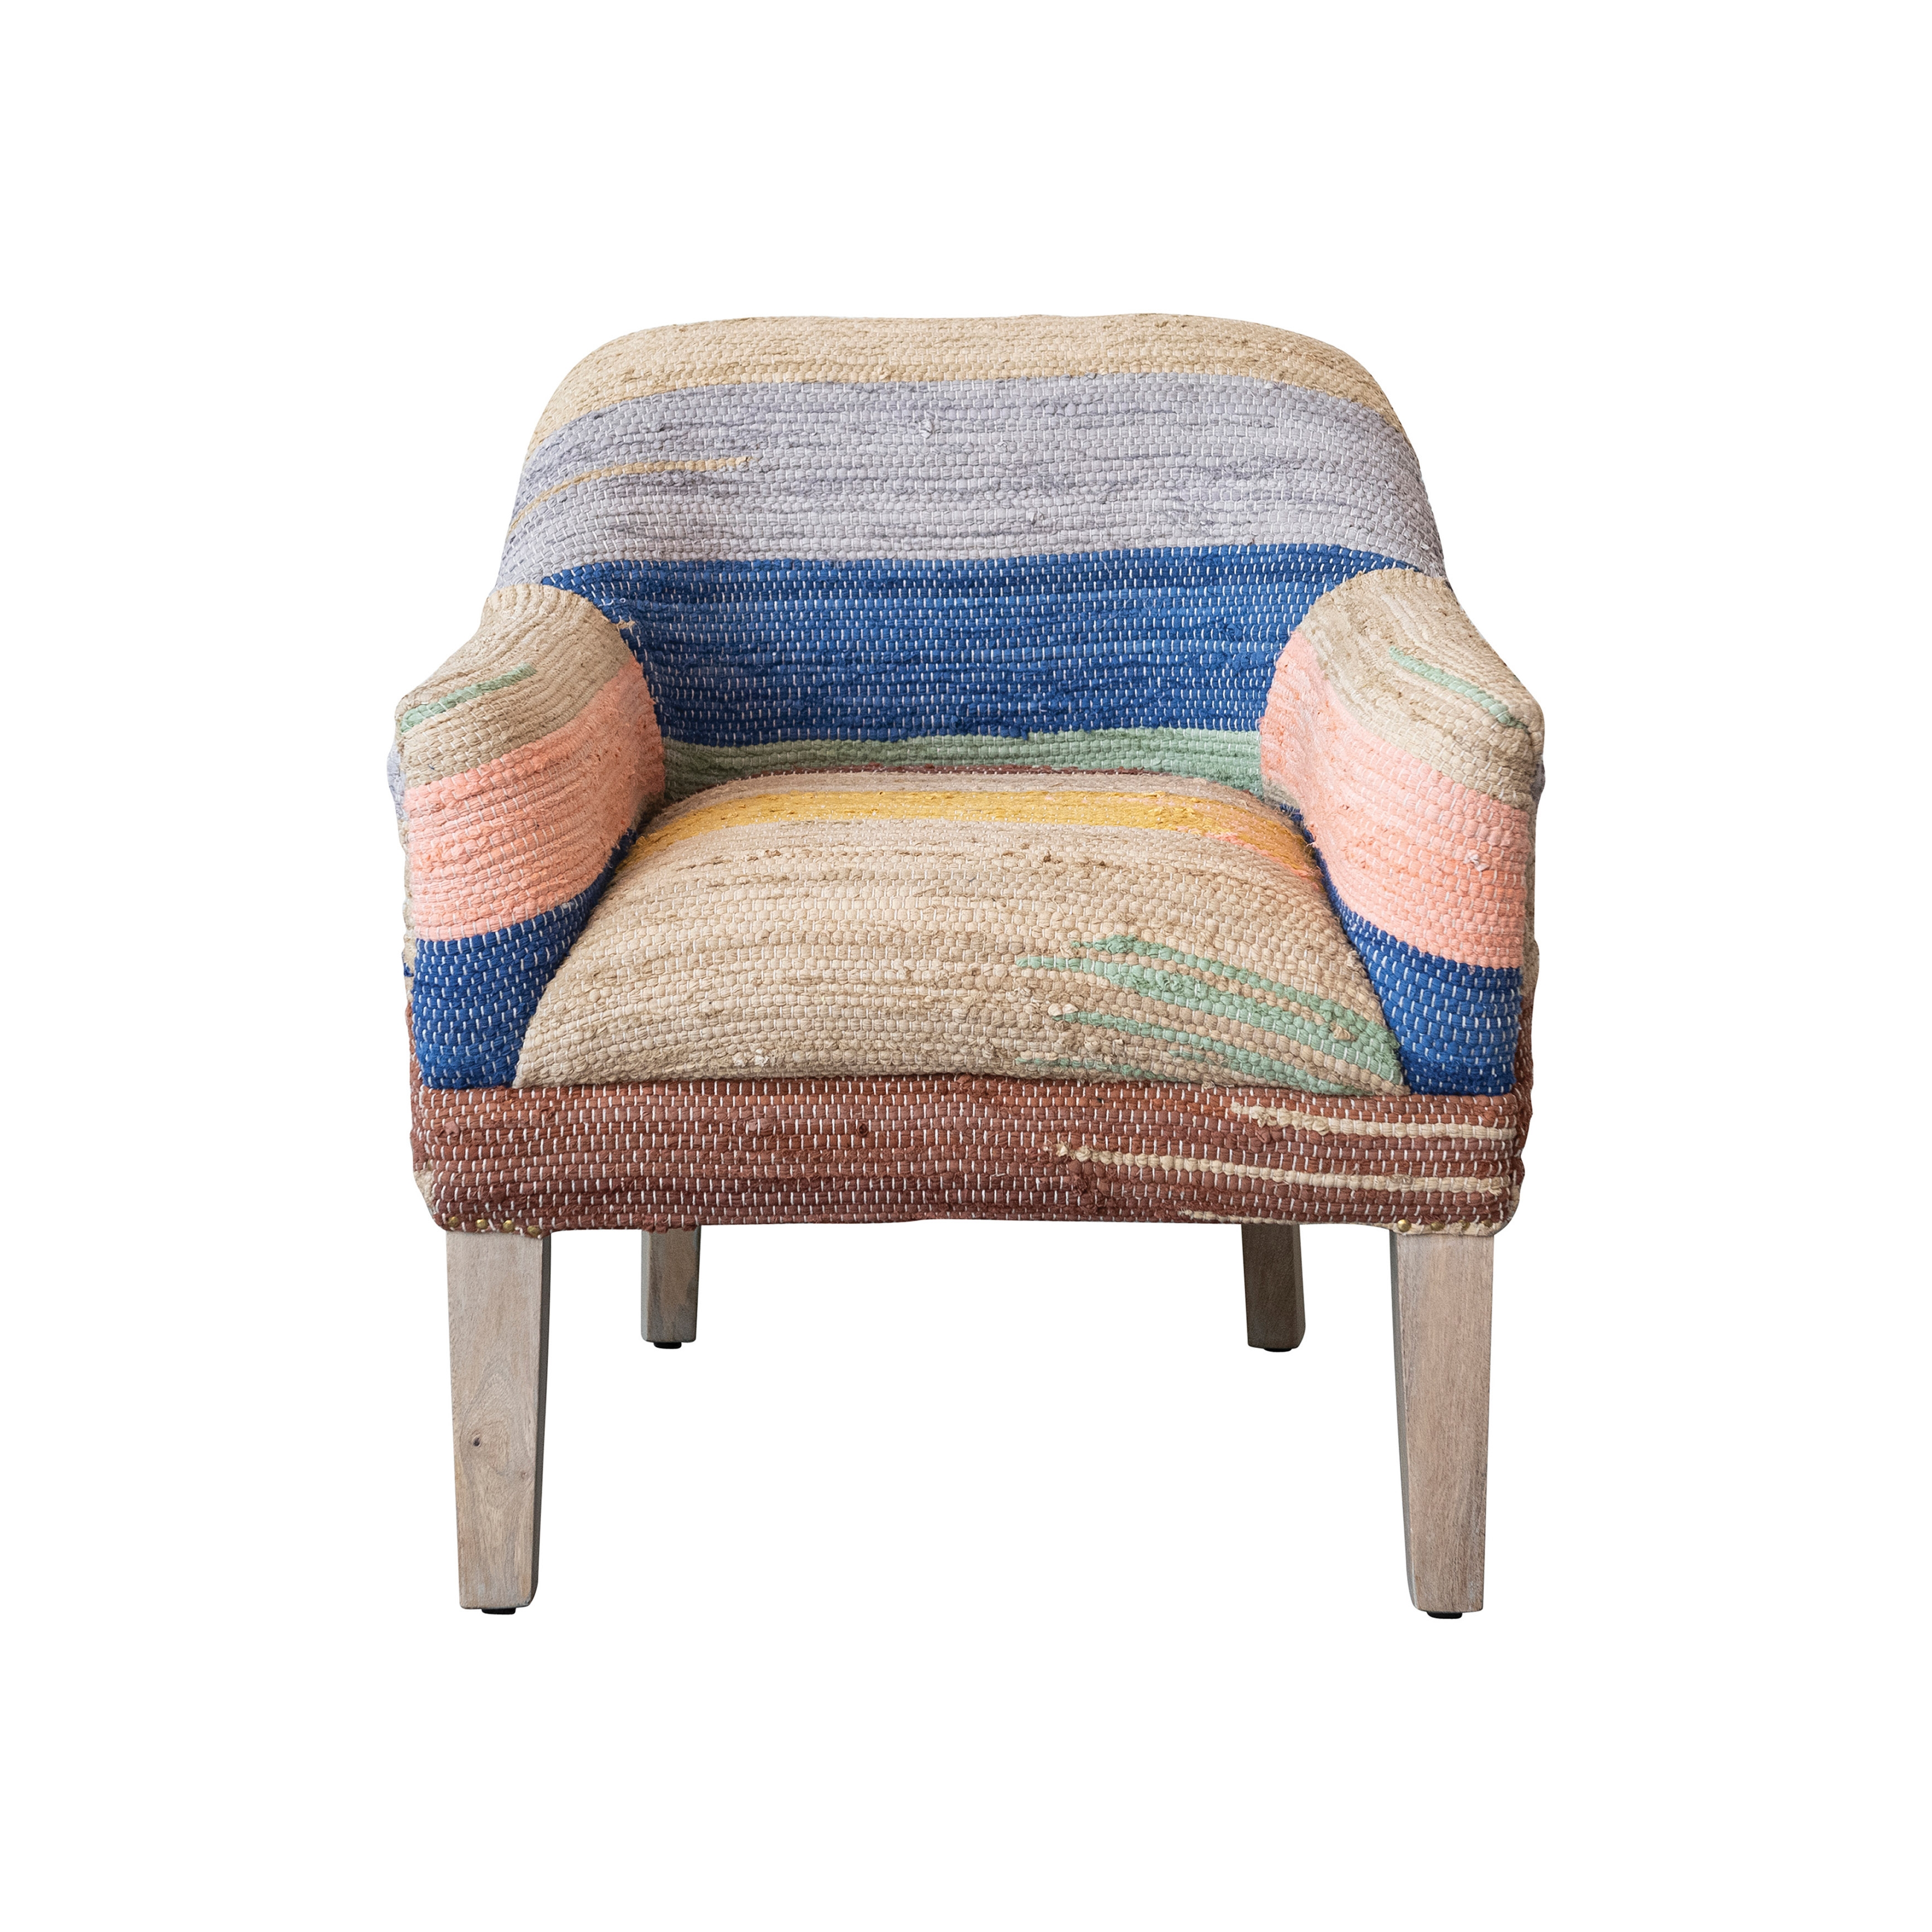 Woven Cotton Chindi Upholstered Chair with Mango Wood Legs and Gold Nail Heads, Multicolor - Image 0